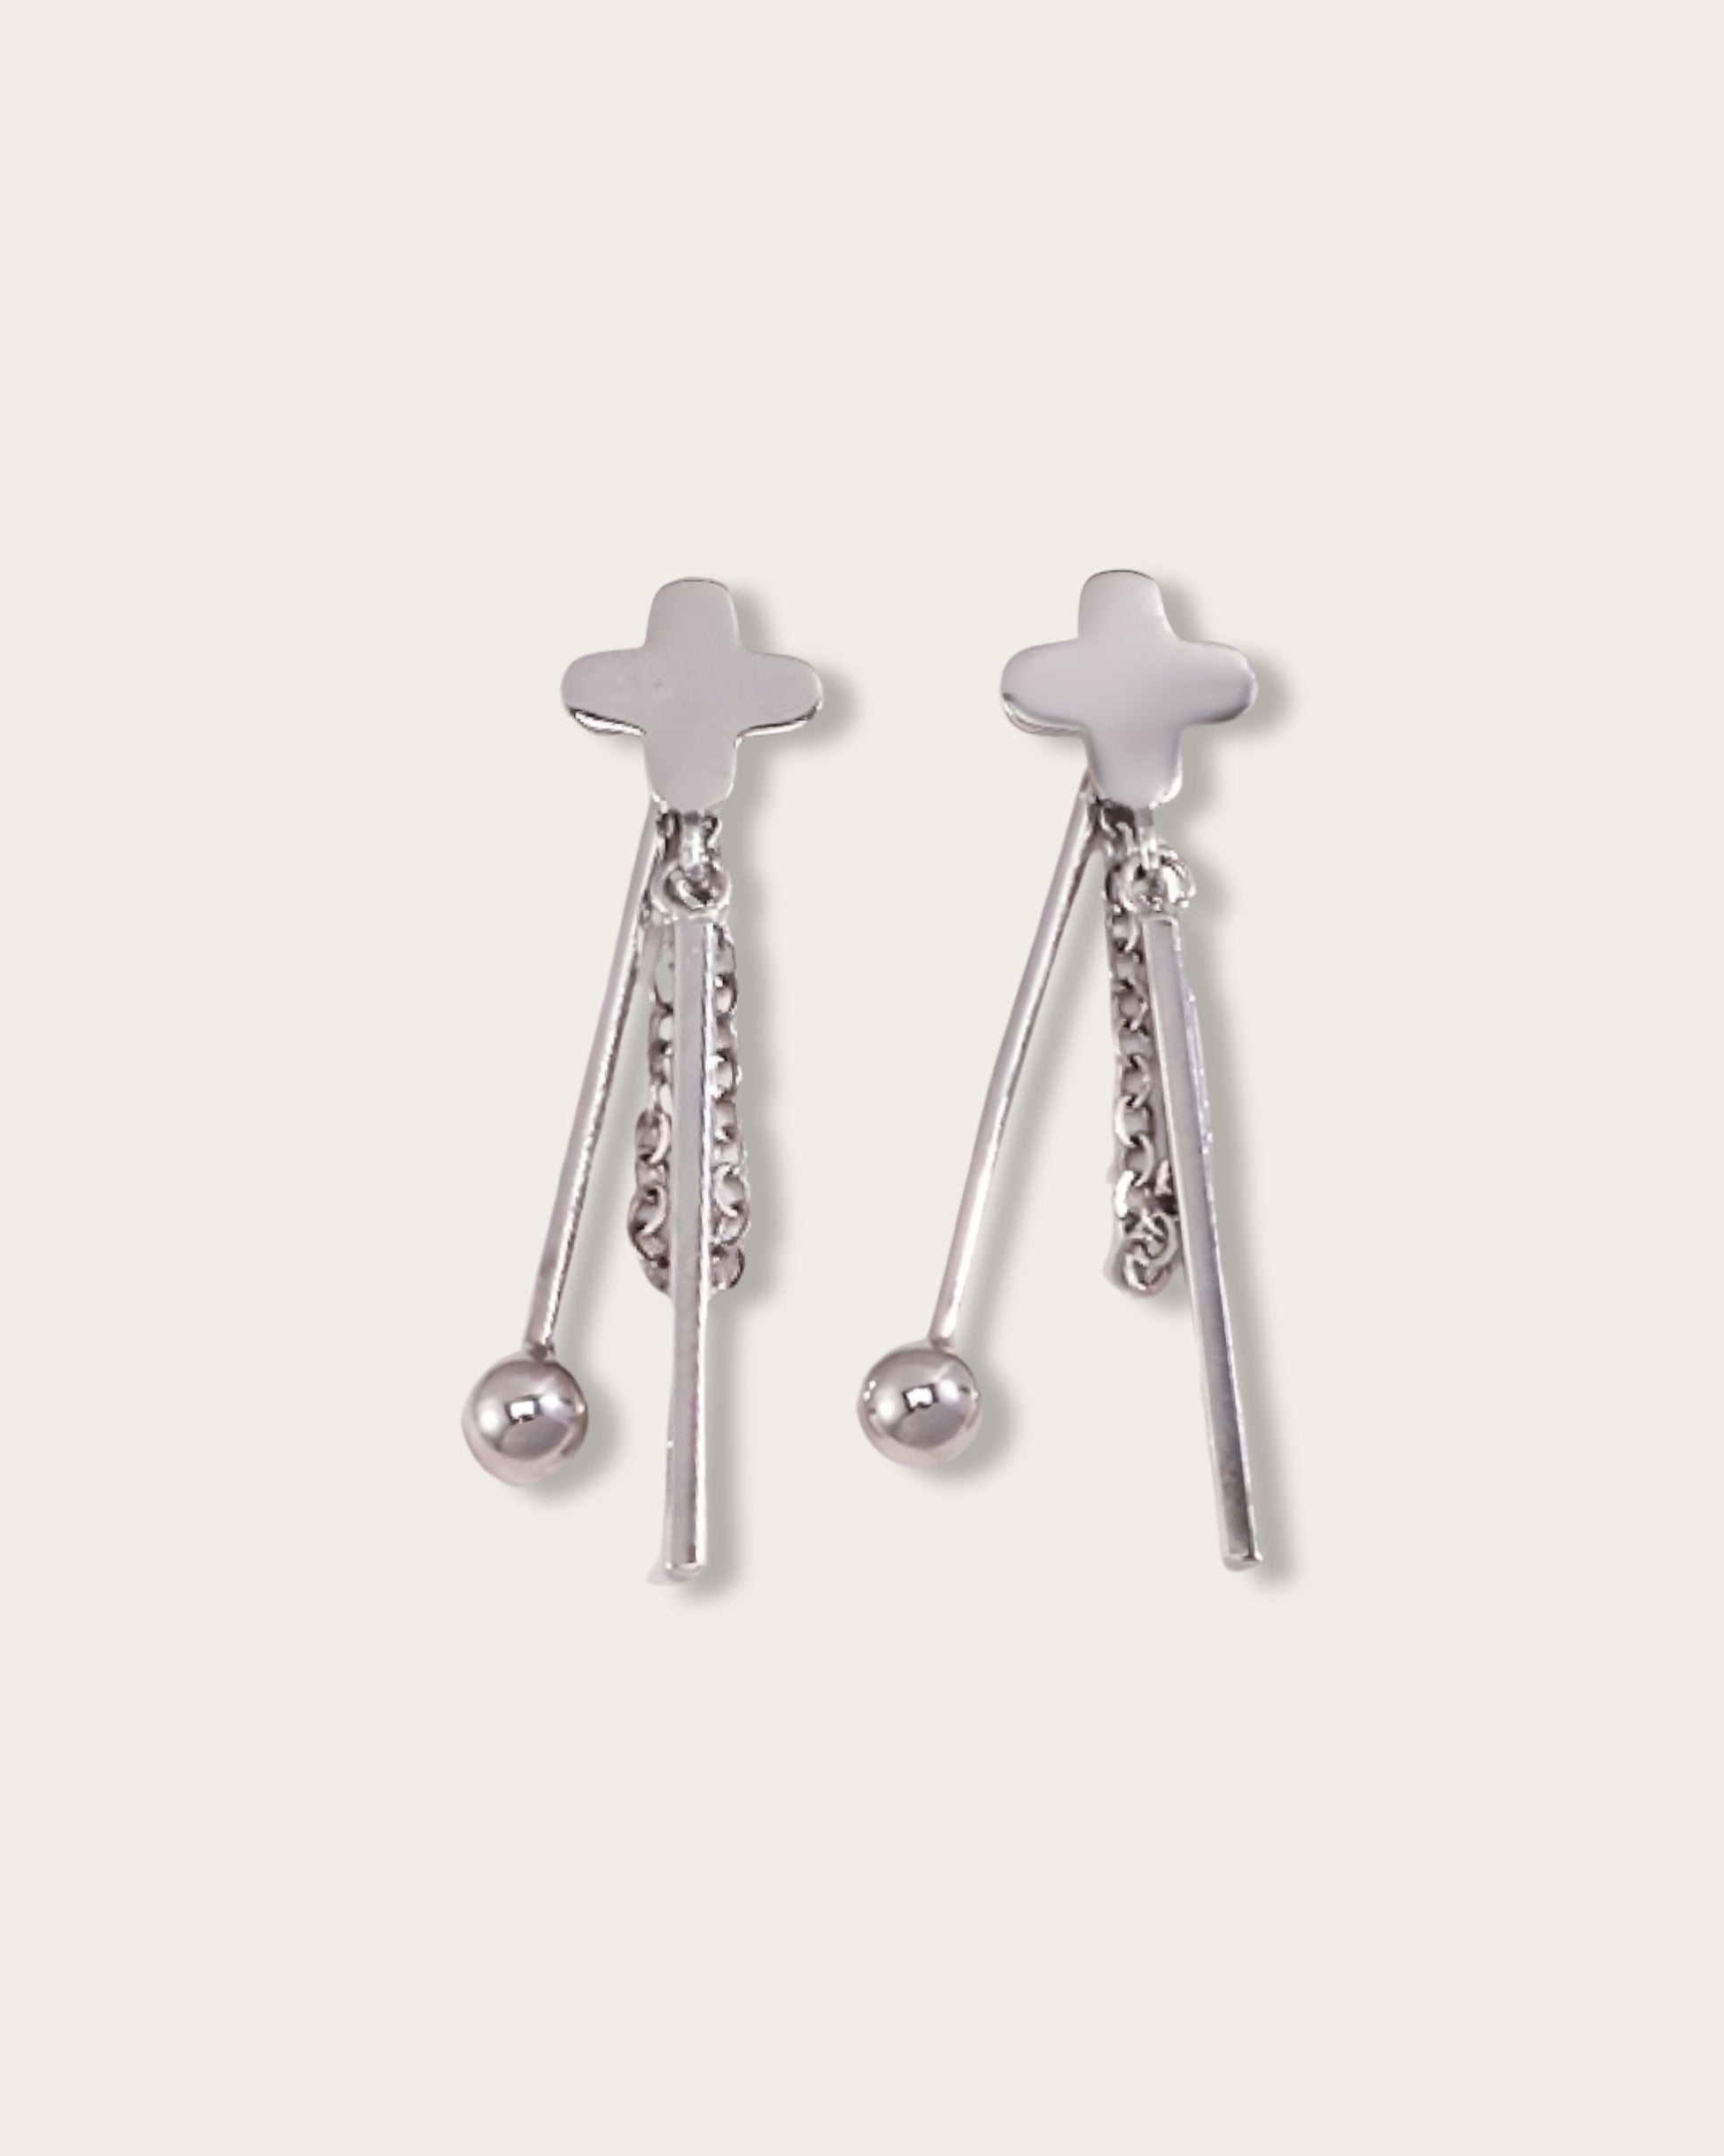 Elegant Cross Earrings - Experience the beauty and faith they represent - S925 Sterling Silver  - Celestial Bliss - Feel the divine charm and be effortlessly trendy - Perfect for any occasion, these stunning pieces will add a touch of elegance to your look